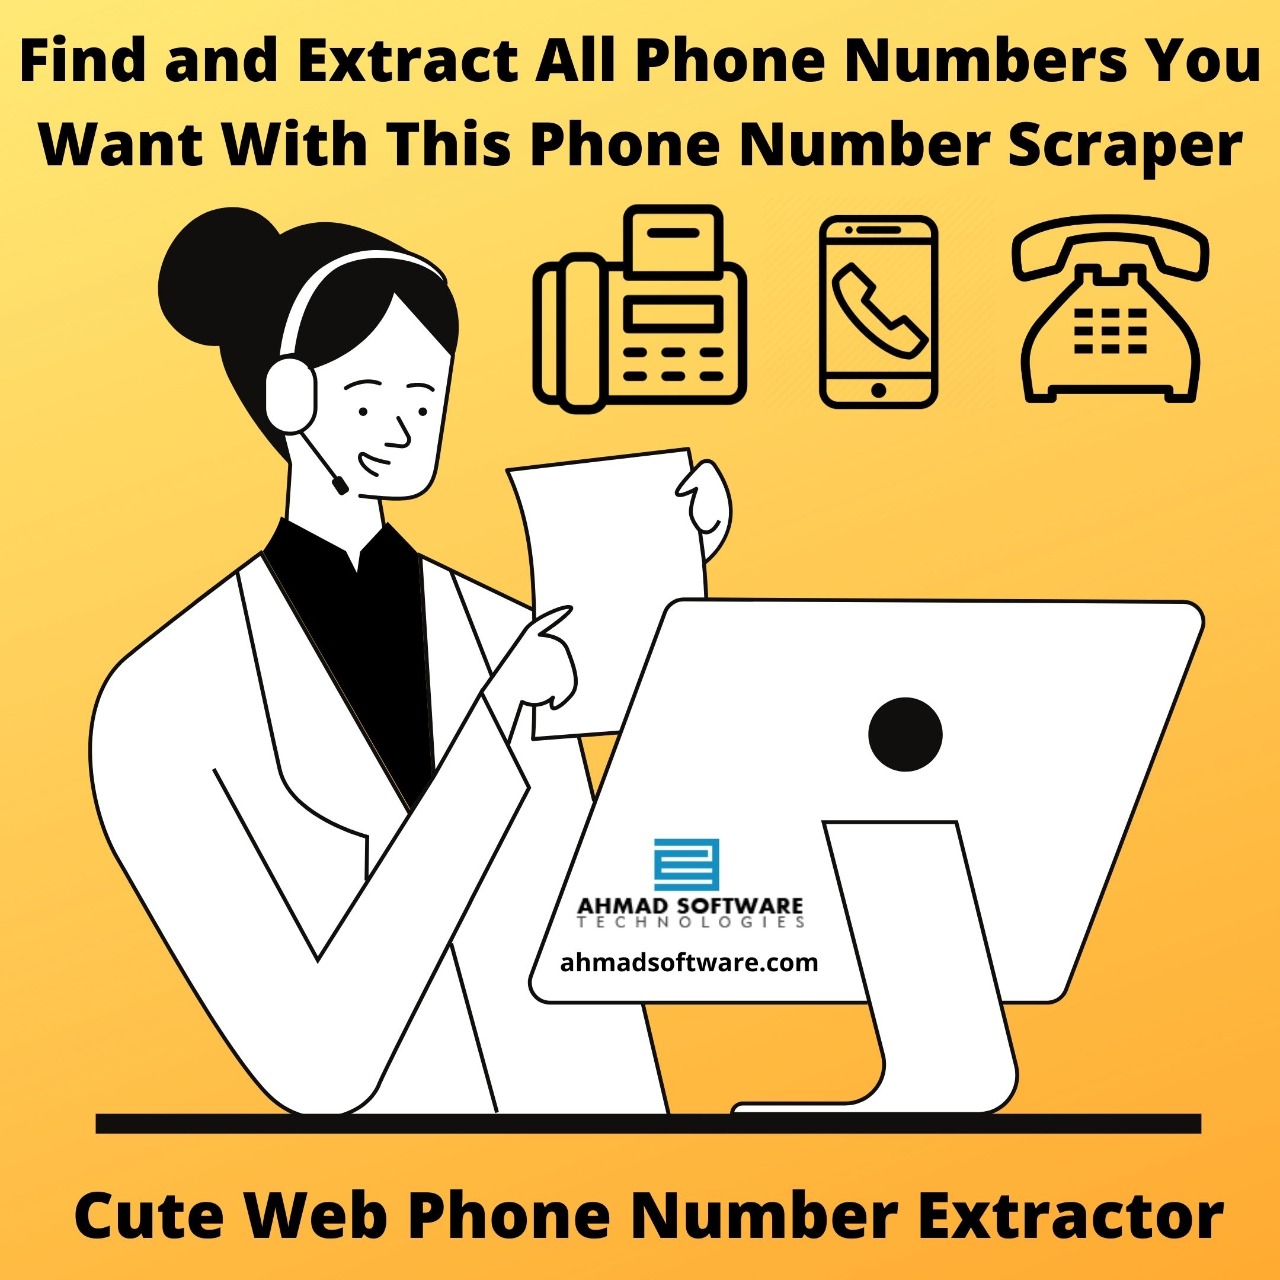 Find and Extract All Phone Number You Want With Phone Scraper